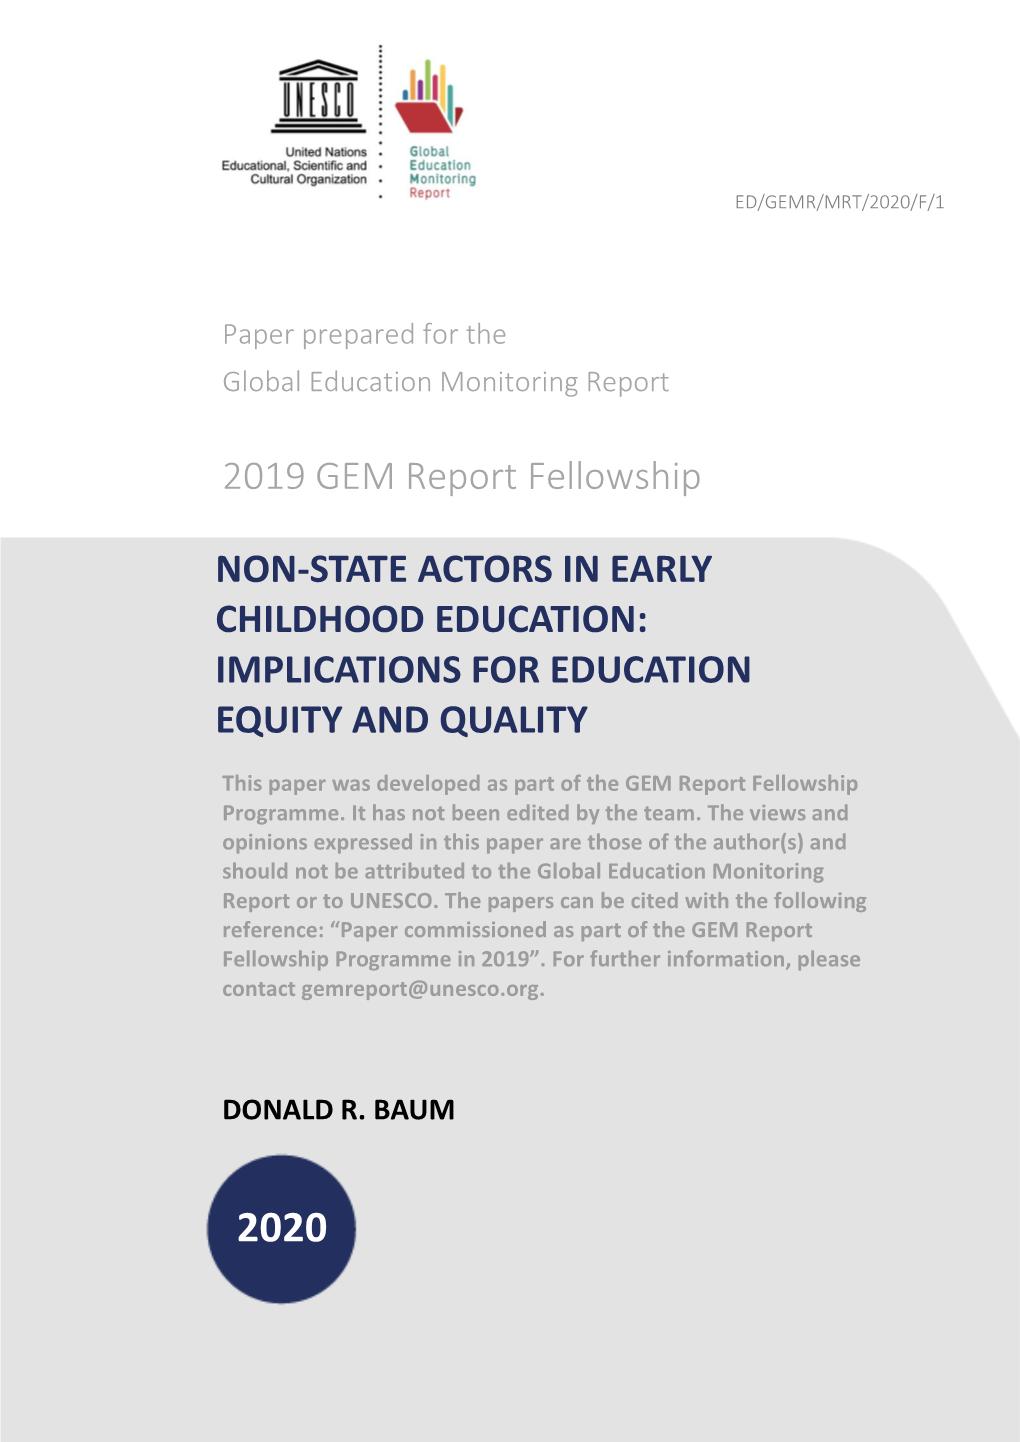 Non-State Actors in Early Childhood Education Is Limited